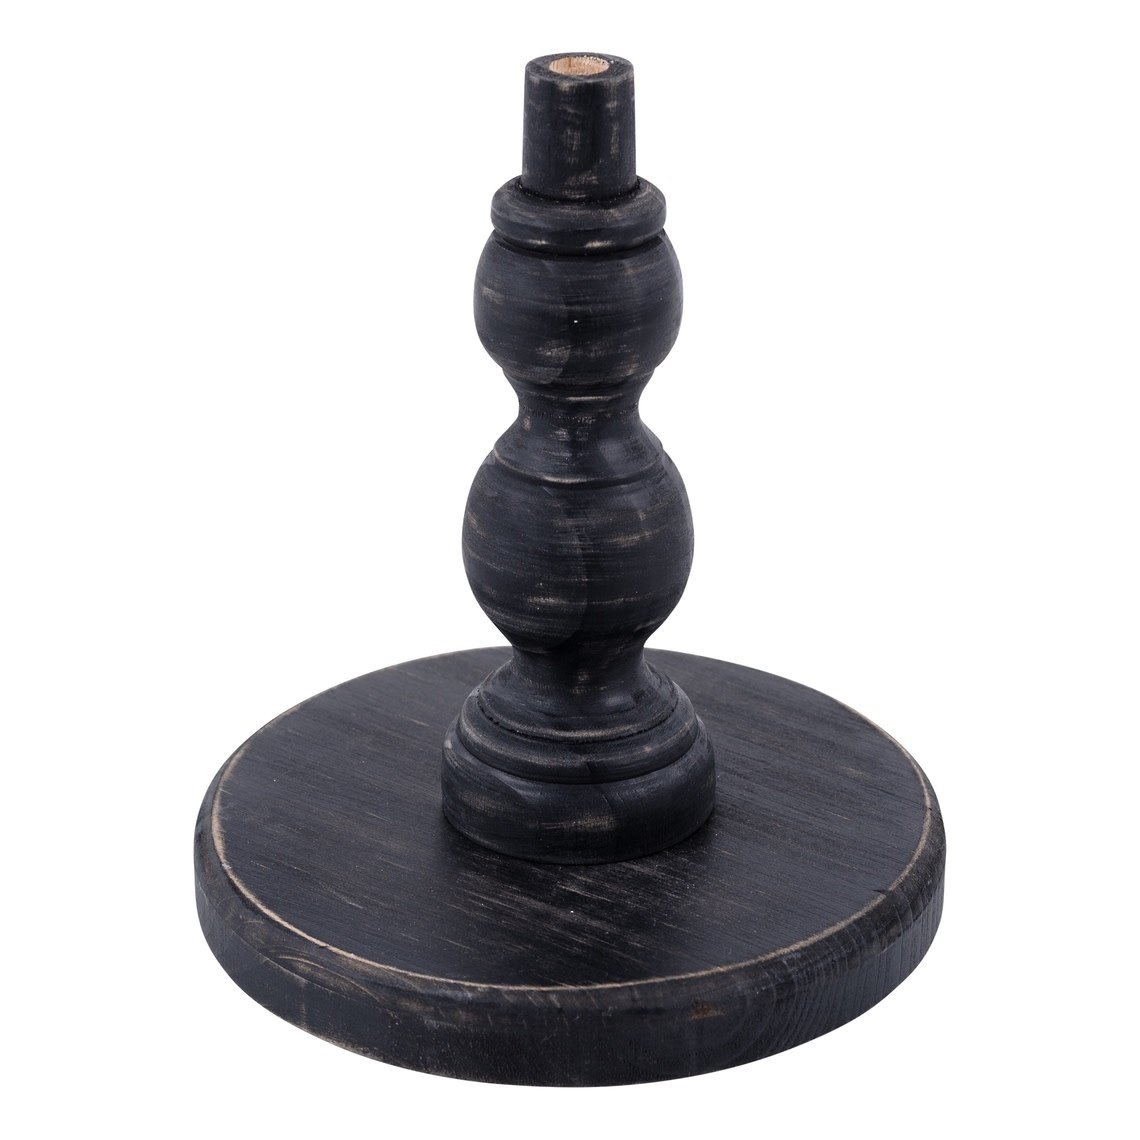 FLEURISH Black Wood Base For Toppers